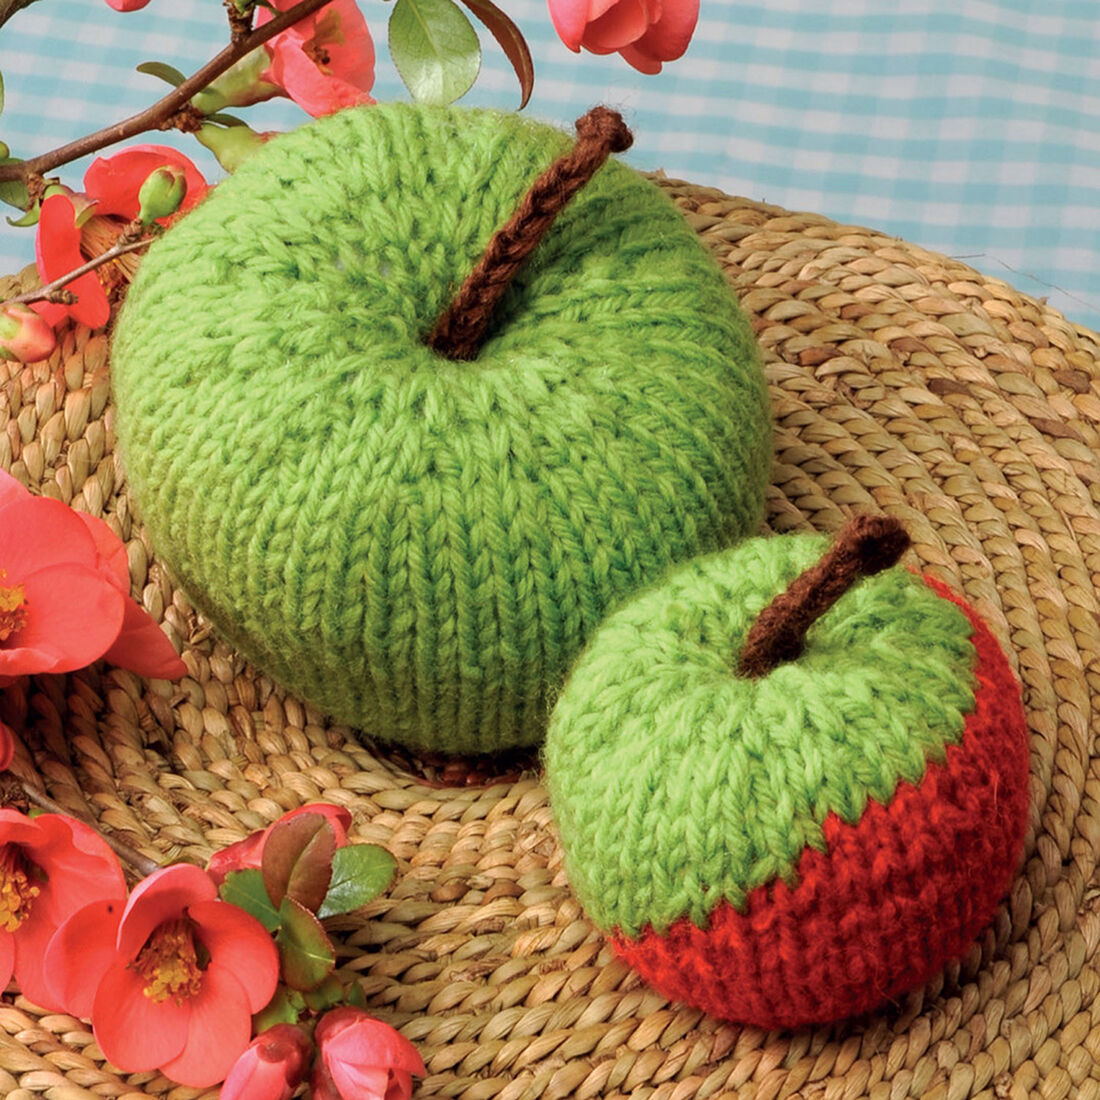 How to Knit an Apple | Hobbycraft